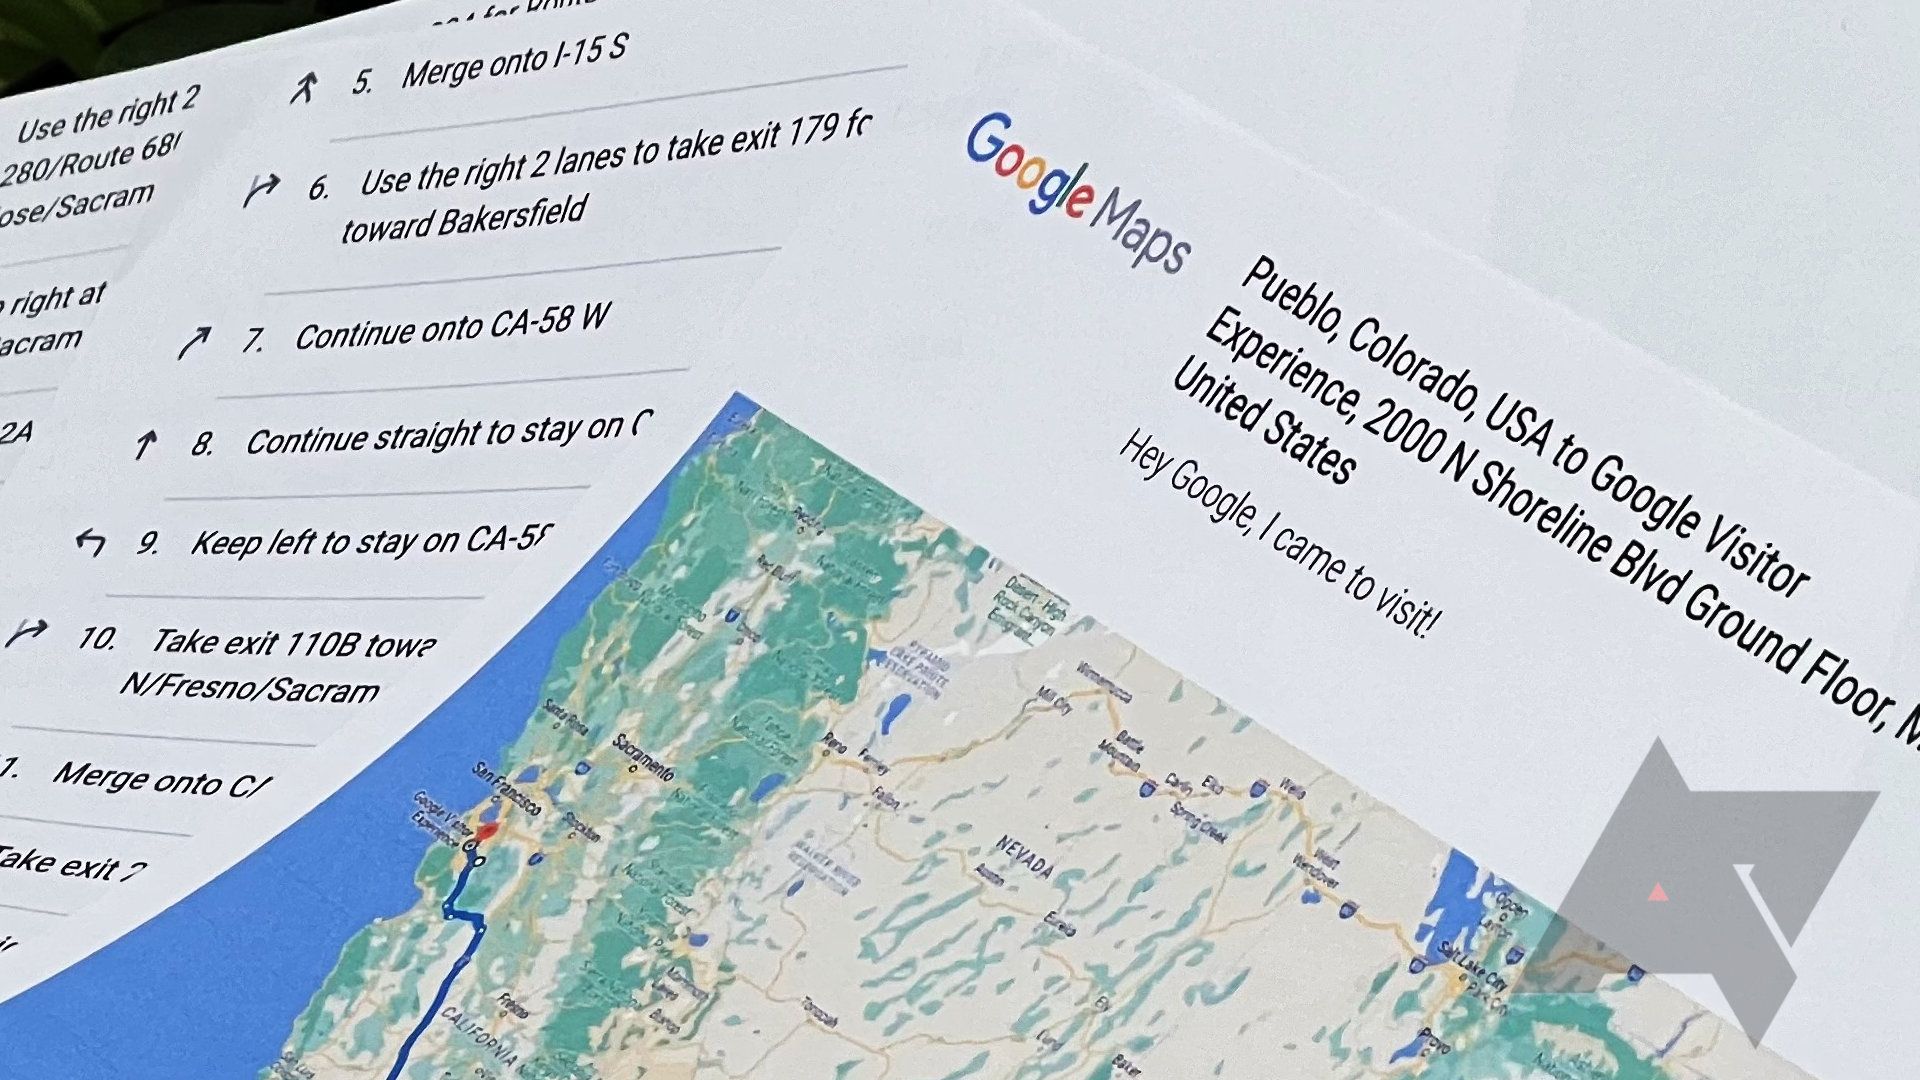 Google Maps directions are shown printed on paper.